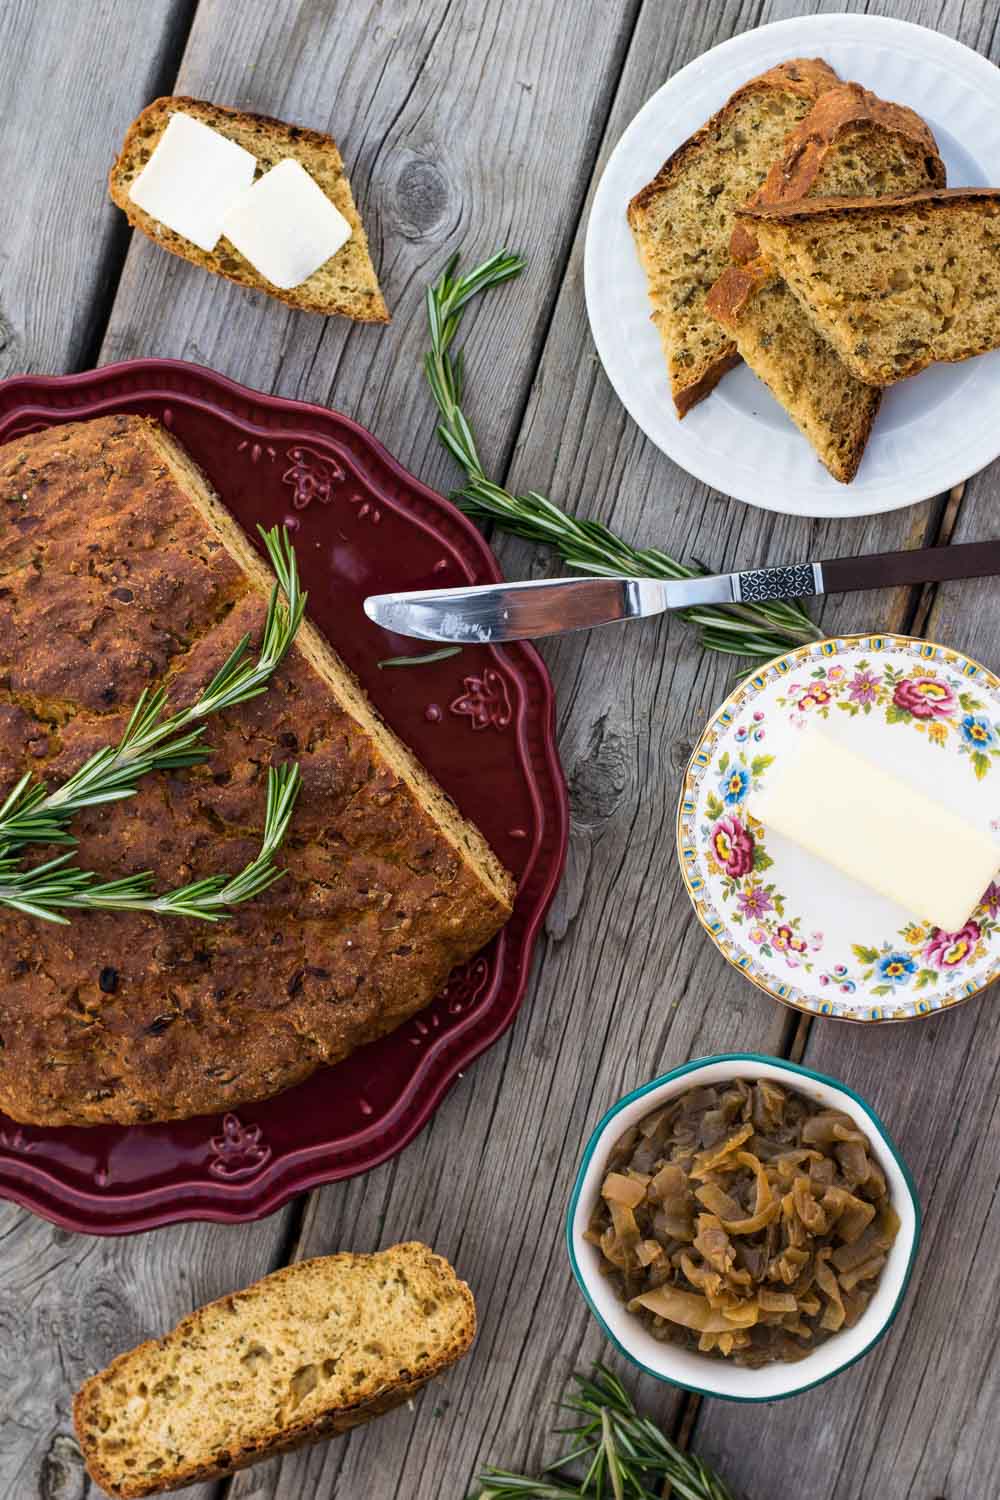 Savory soda bread packed with creamy caramelized onions & rosemary is an easy no-knead, no-rest, six-ingredient bread recipe that's worth making all year round!